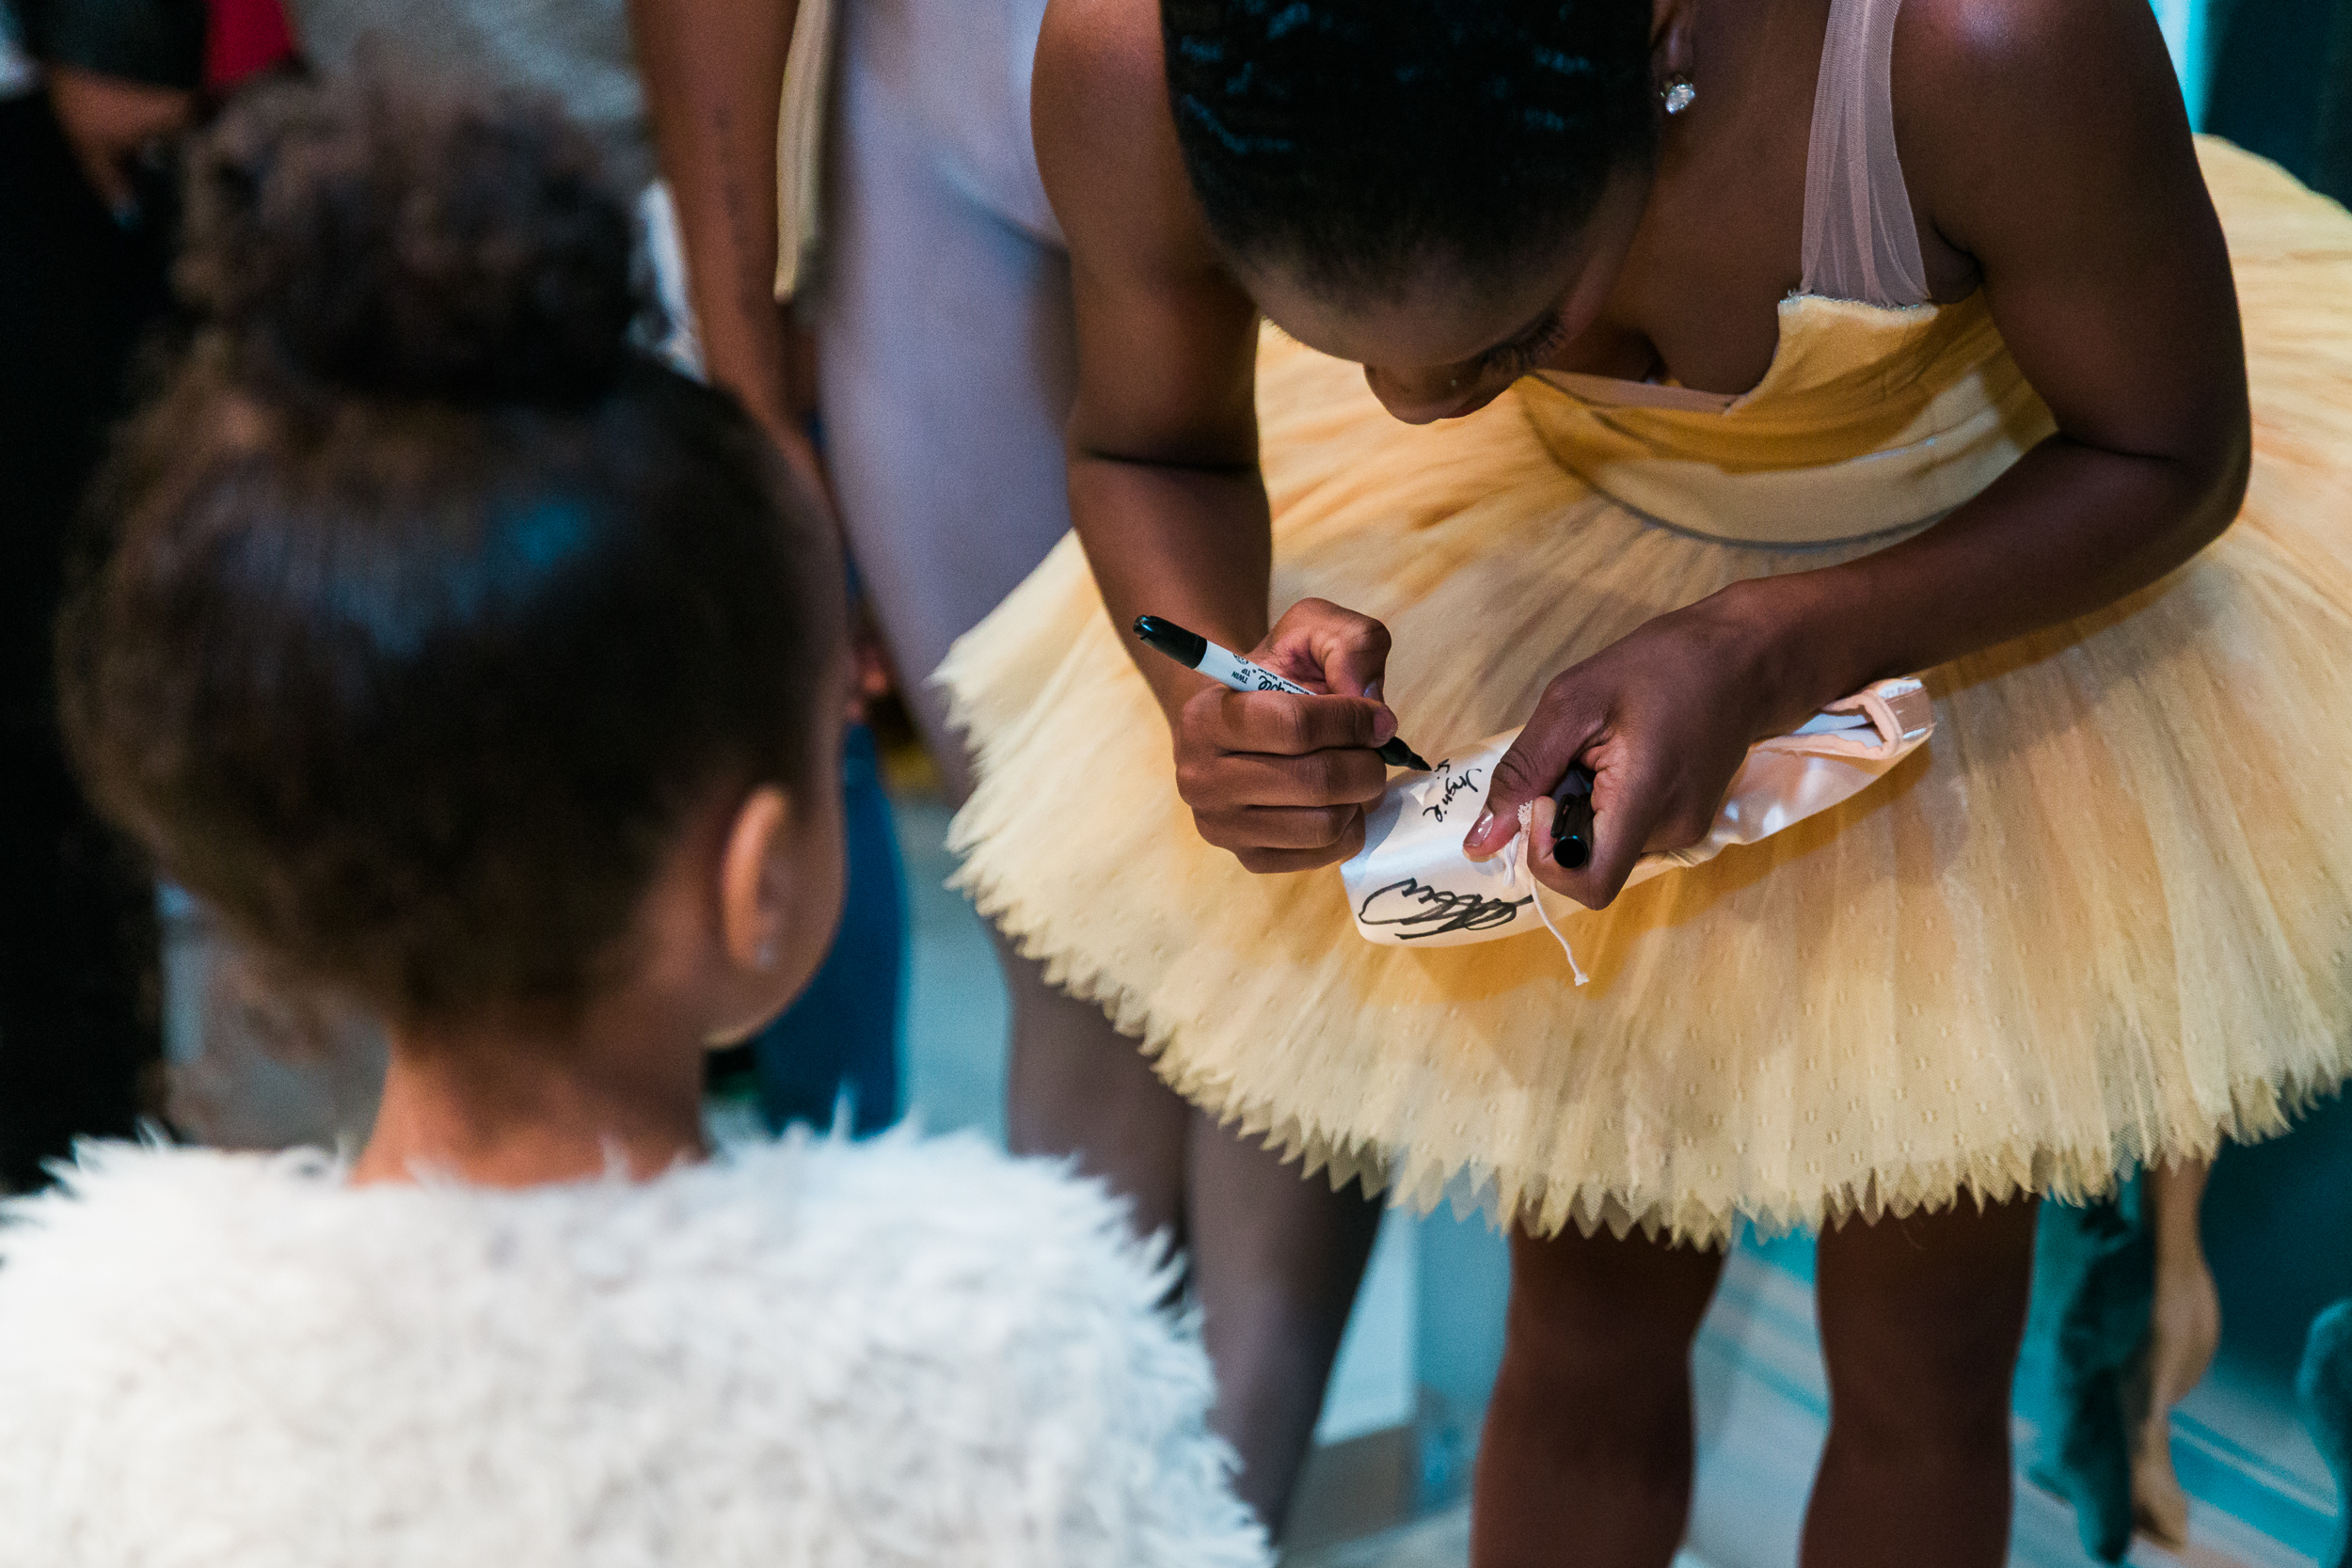  Dance Theatre of Harlem company member Ingrid Silva, during a  Meet the Ballerina  event at New York City Center. 